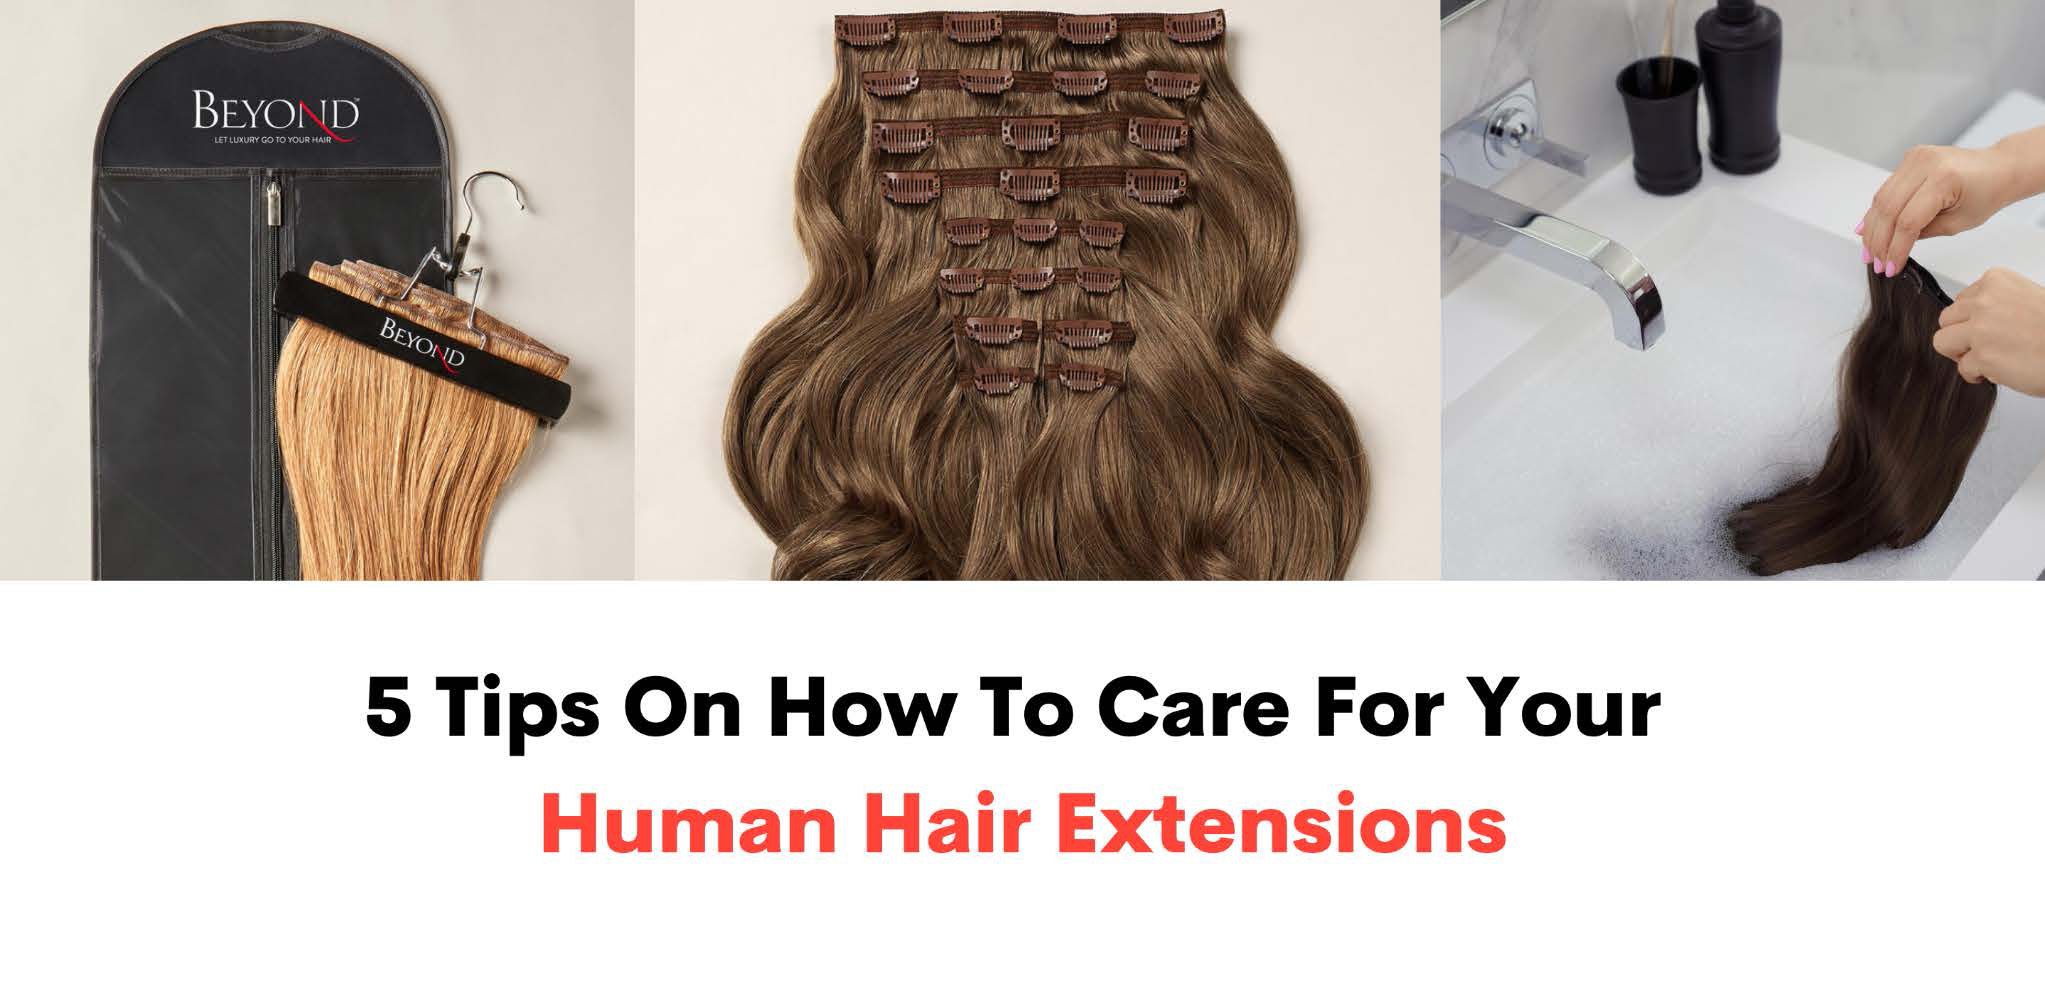 5 tips on how to care for your human hairextensions